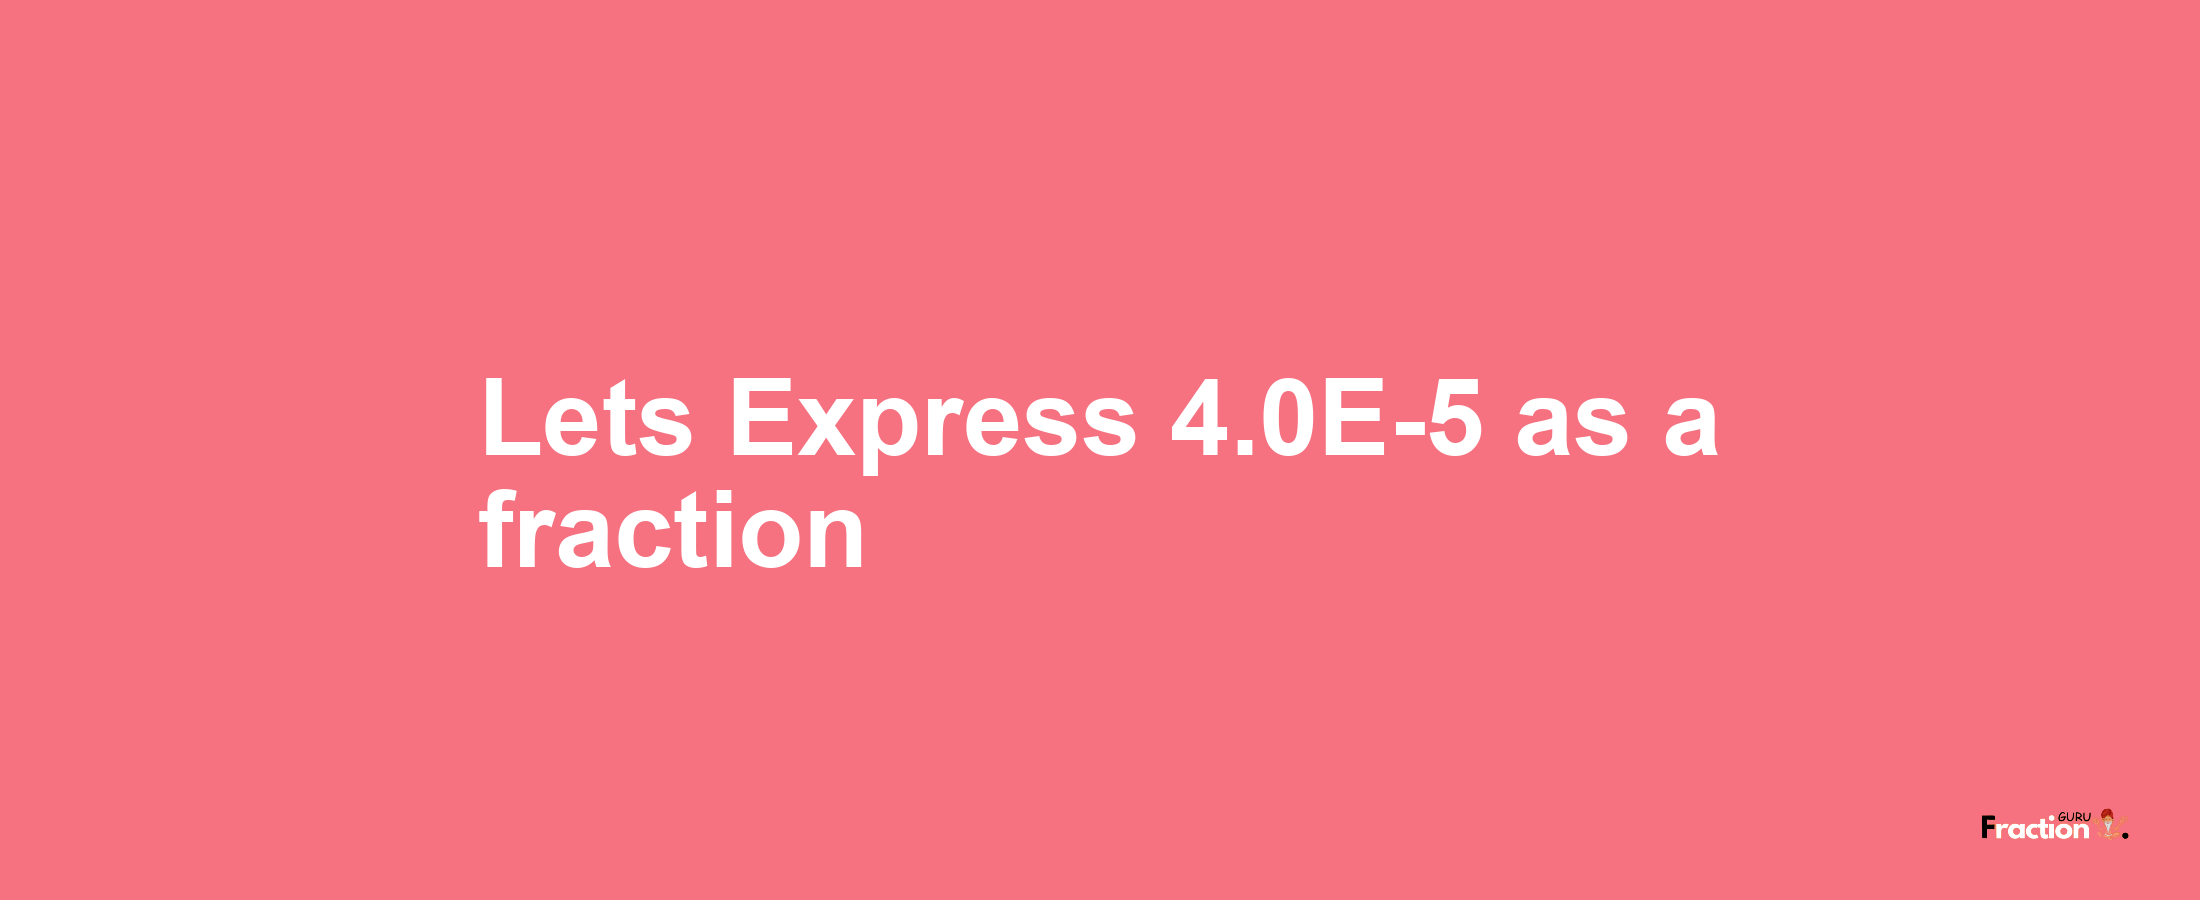 Lets Express 4.0E-5 as afraction